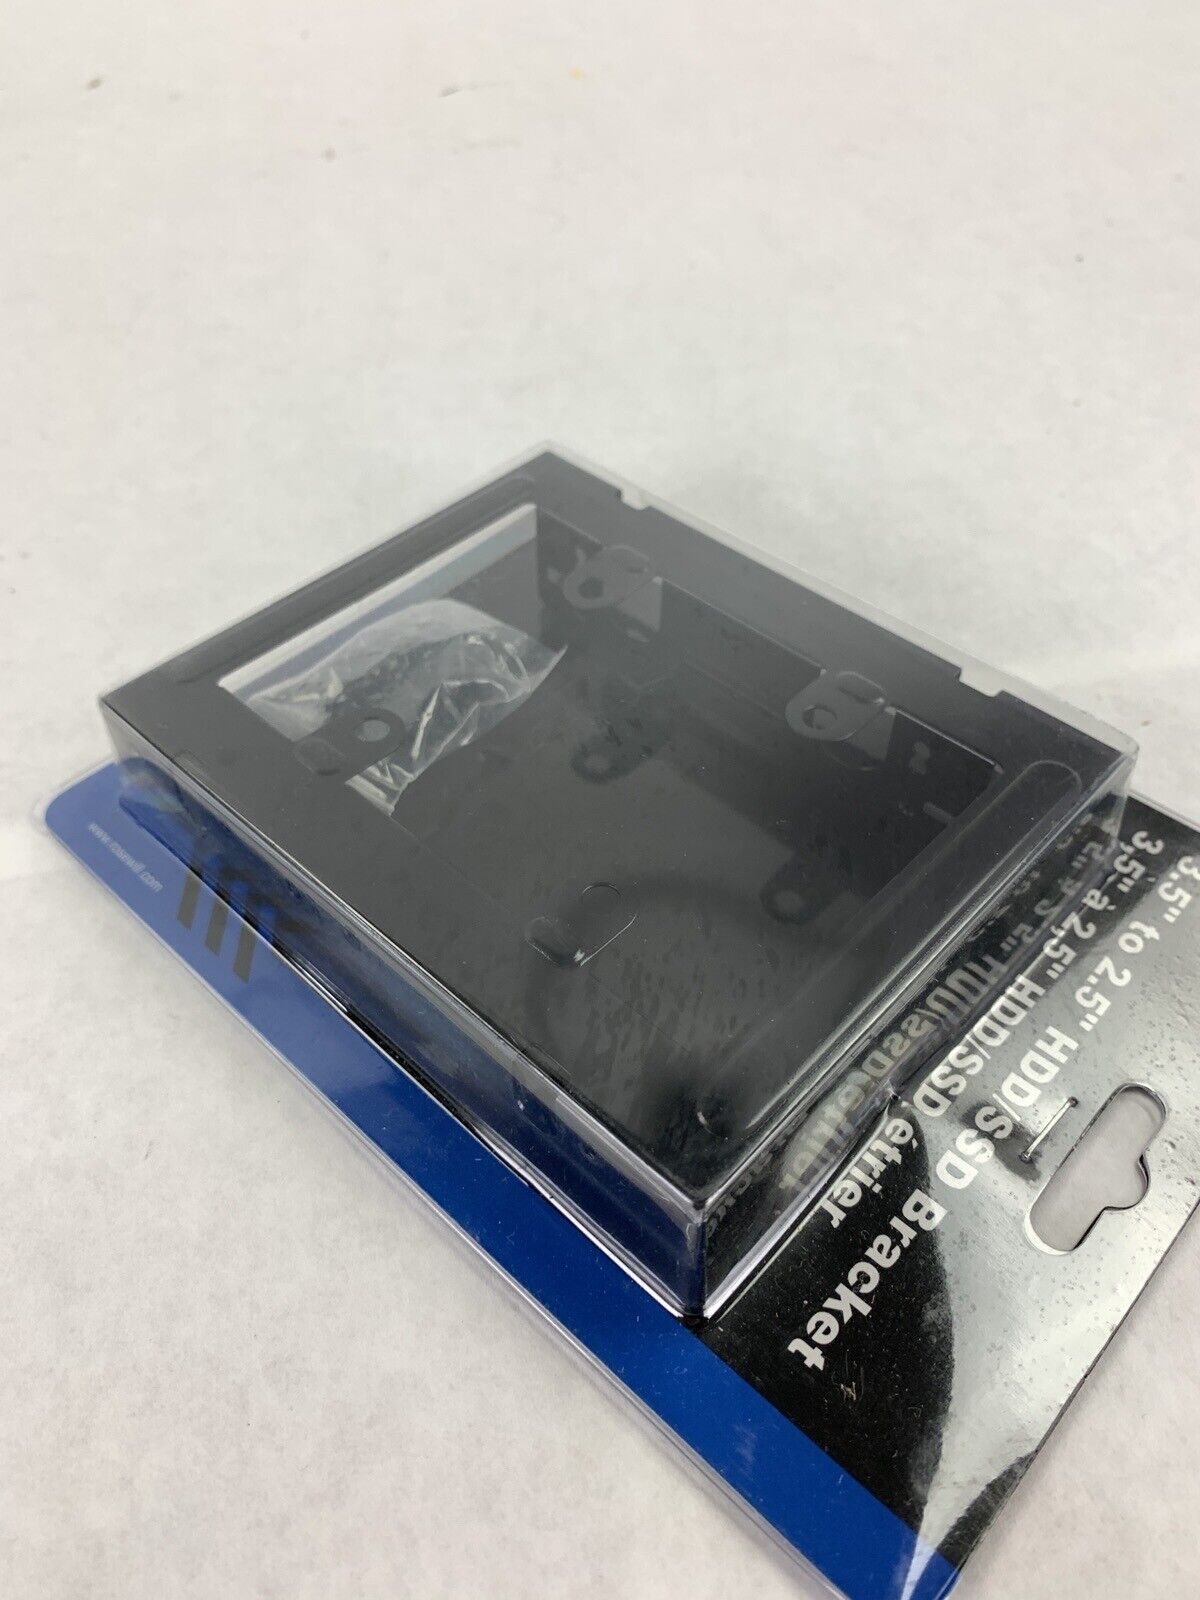 New OEM Rosewill 3.5" to 2.5" HDD/SSD Bracket RDRD-11004